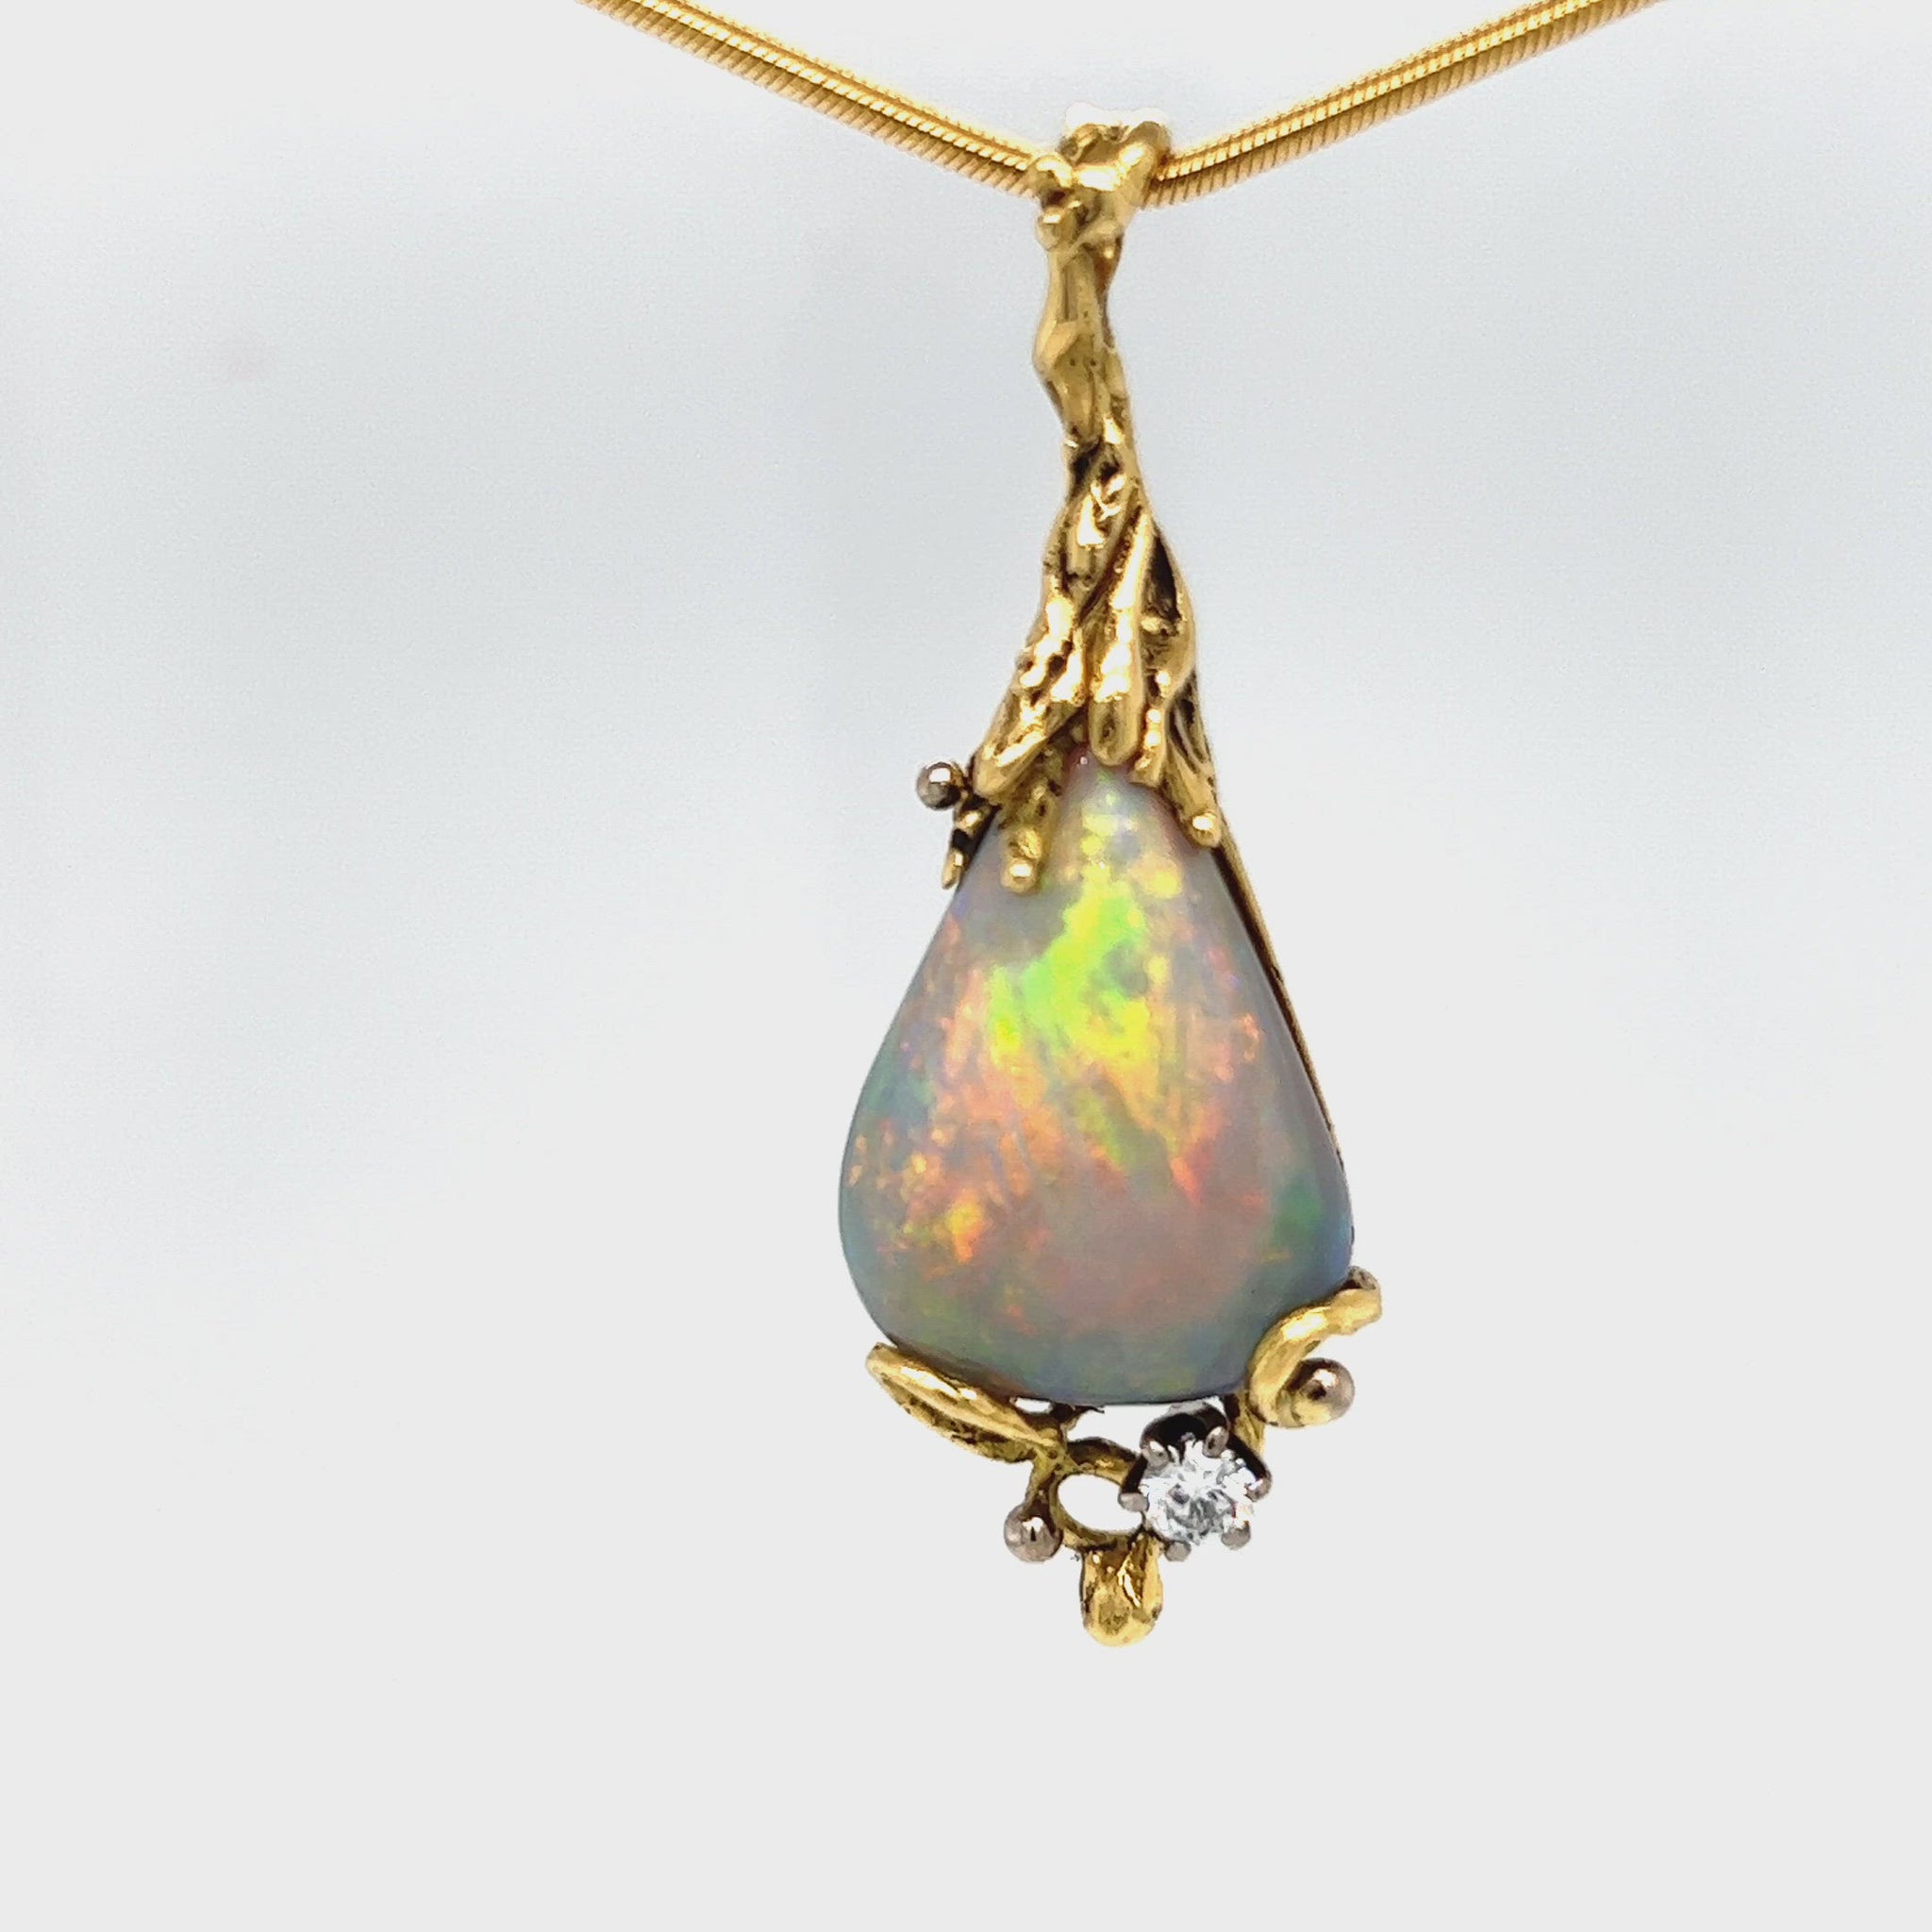 Stunning pendant hand made by Sally Fisher. Beautiful 8.5ct Lightning Ridge black opal mined 25-30 metres below what is now the 'Black Opal Motel'. Moulded 18ct gold  finished off with a brilliant cut diamond.  A masterpiece.